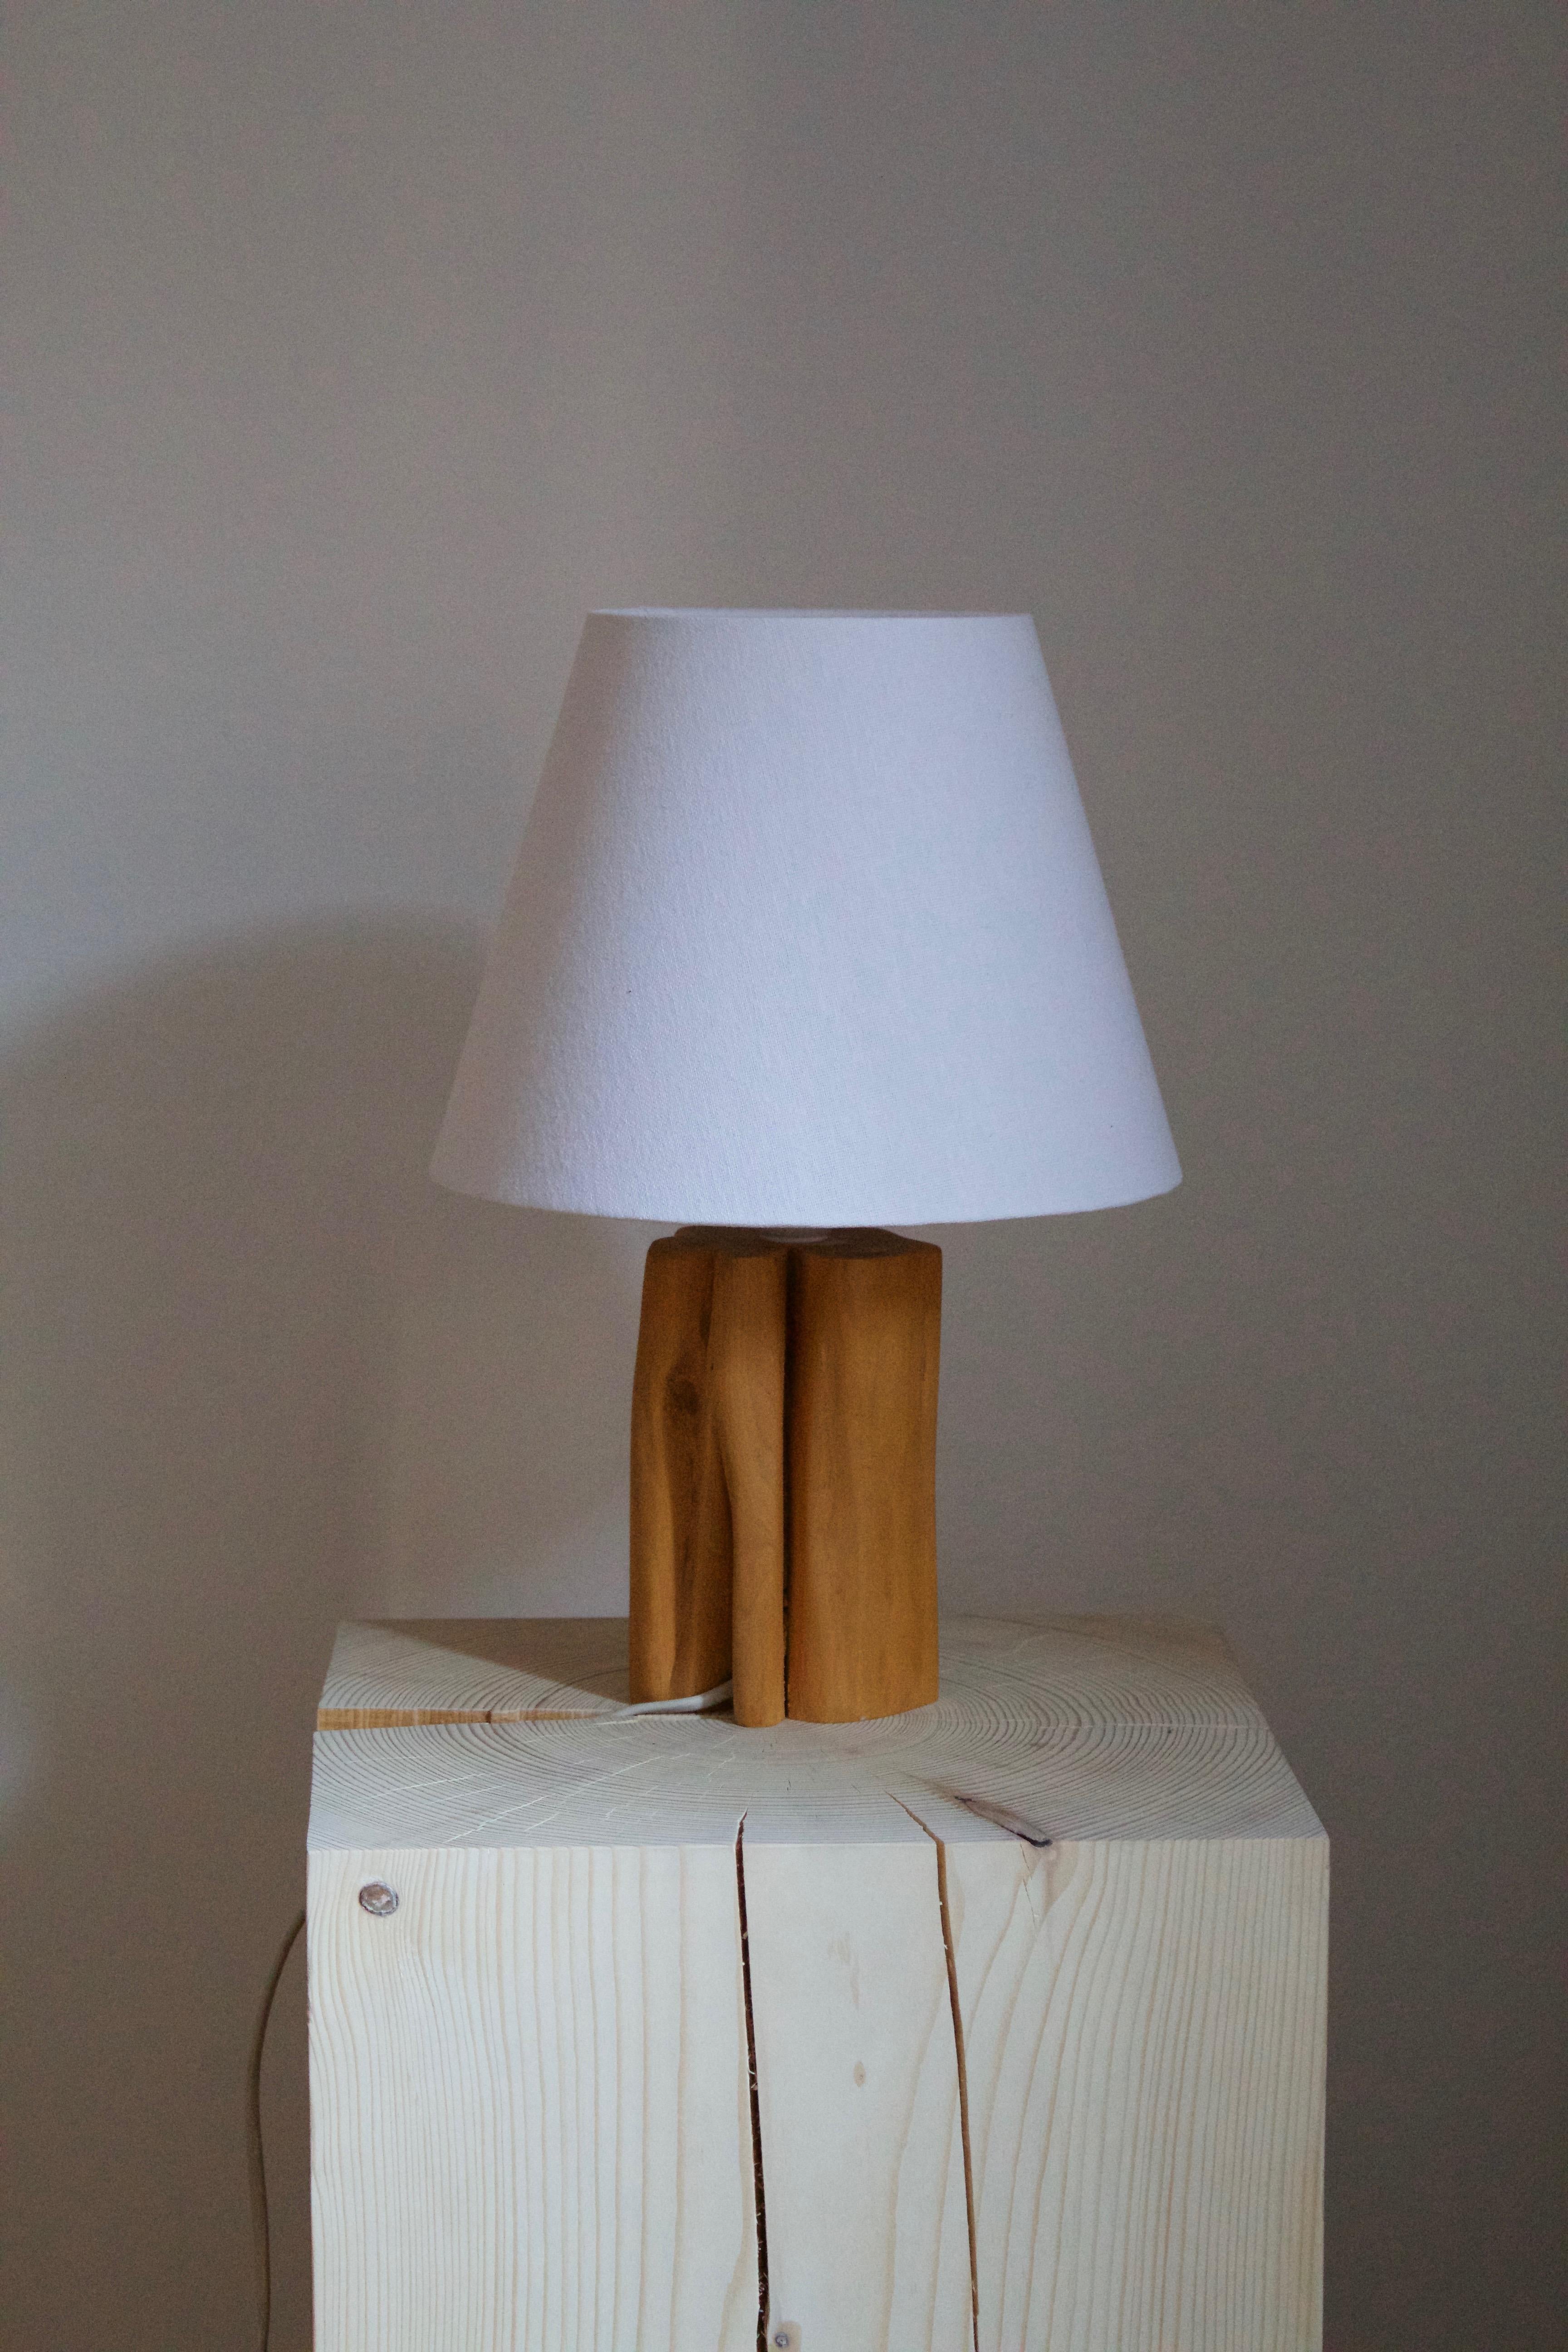 An organic freeform table lamp / desk light. Produced and designed in Sweden, 1971. Signed 